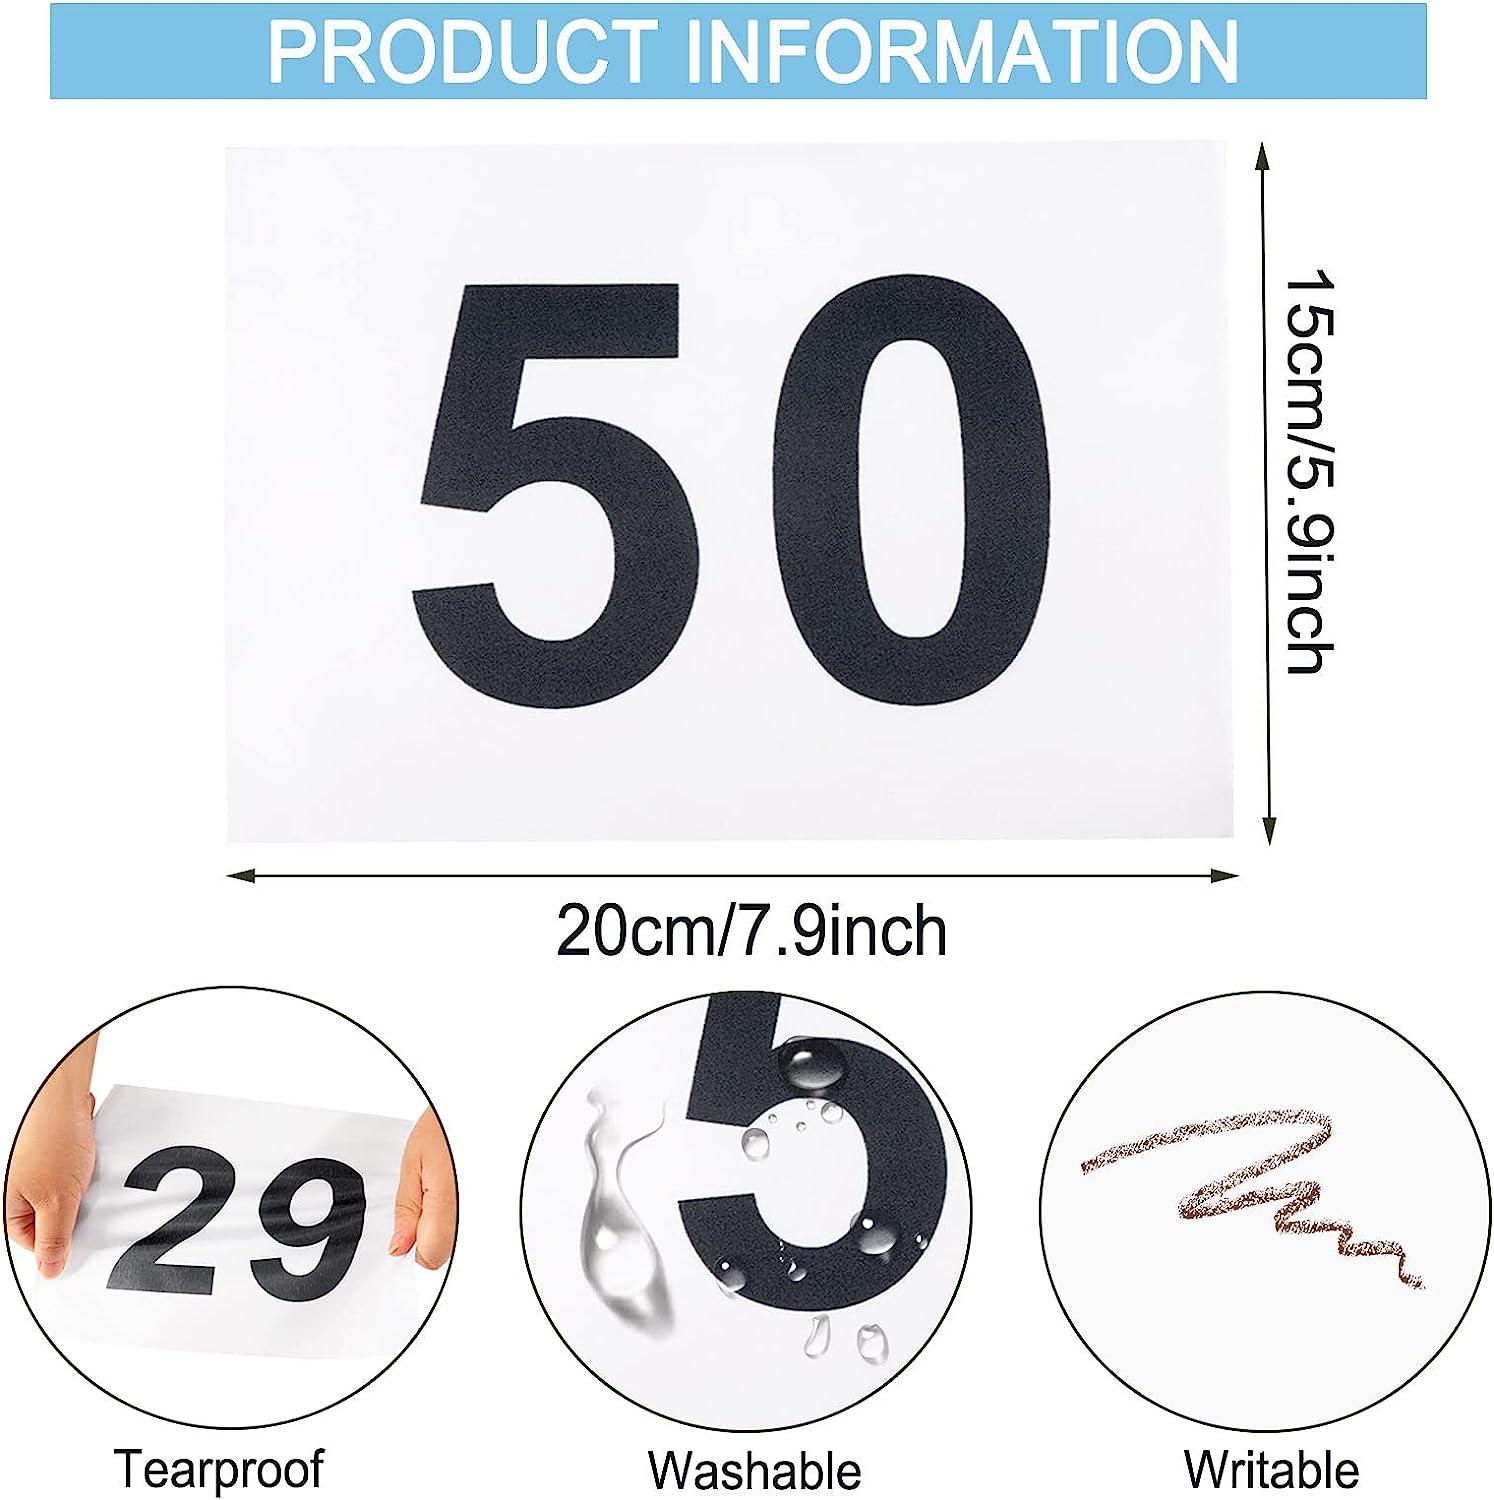 Buy Hanaive 200 Pieces Running Bib Numbers with Safety Pins for Marathon  Sports Competition Events Tearproof Waterproof, 6 x 7.5 Inch (1-200 Number)  Online at Low Prices in India 